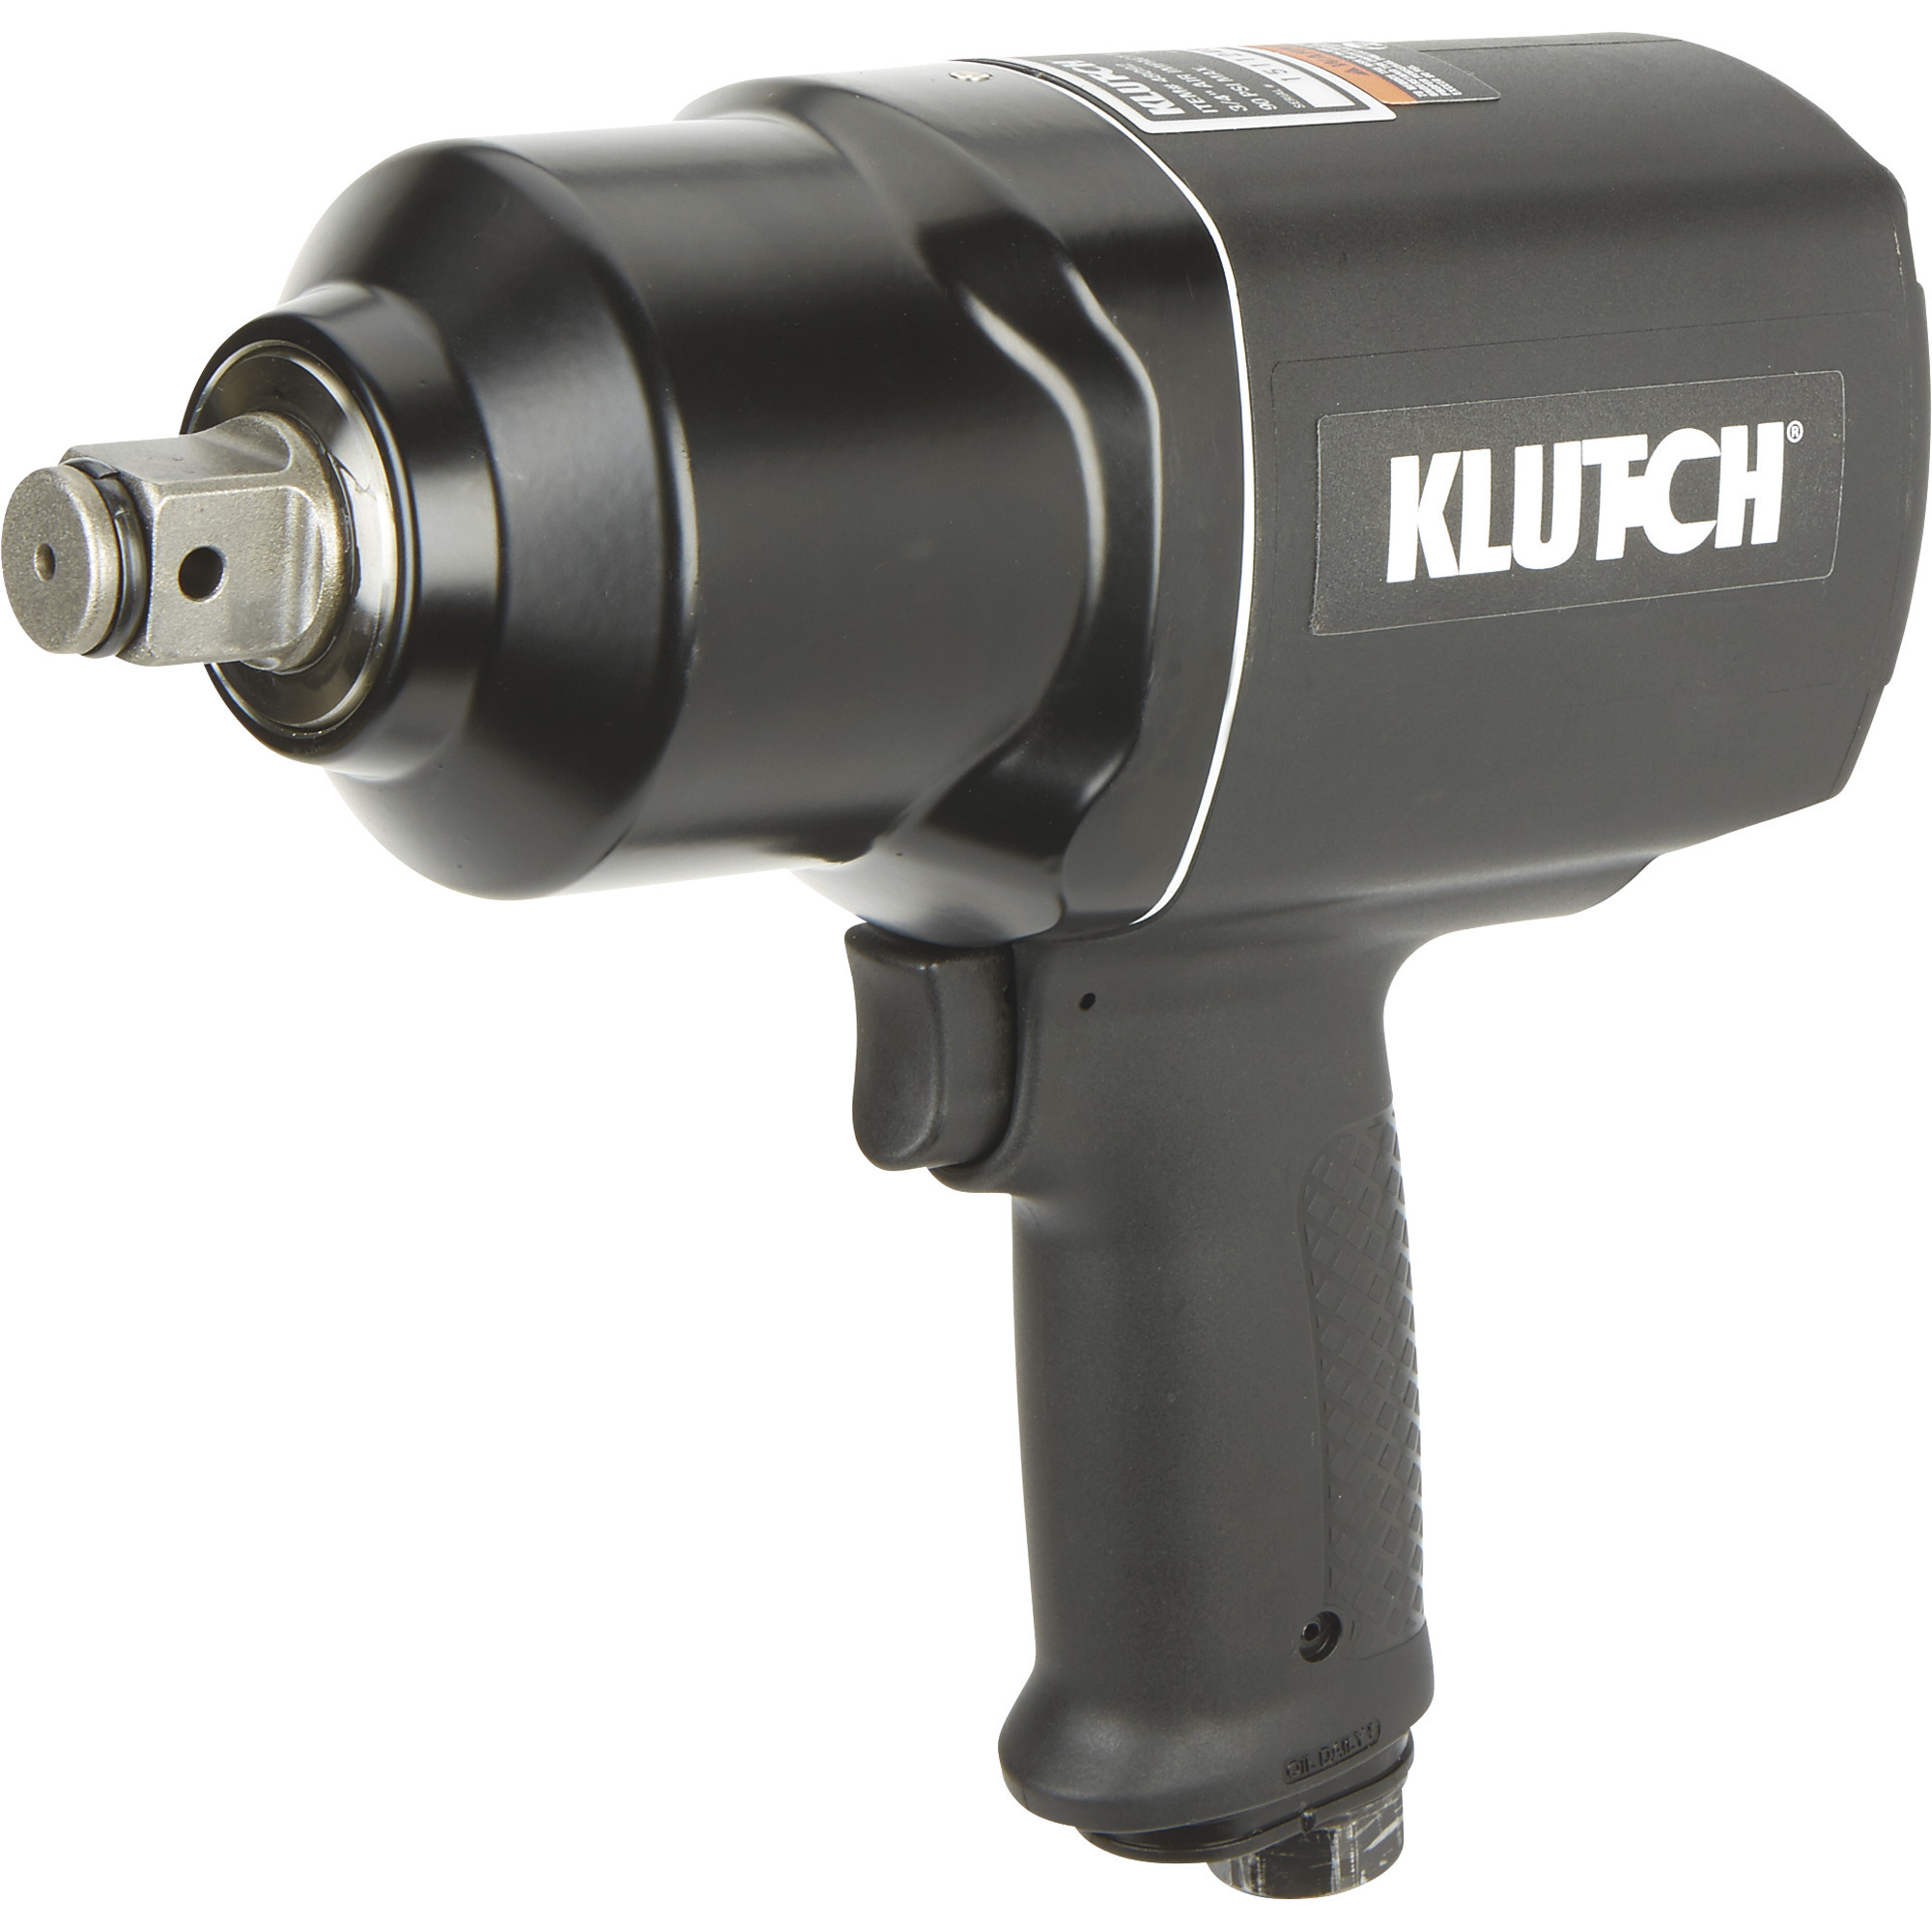 Klutch Air Impact Wrench, 3/4in. Drive, 1500 Ft./Lbs. Torque, 7 CFM